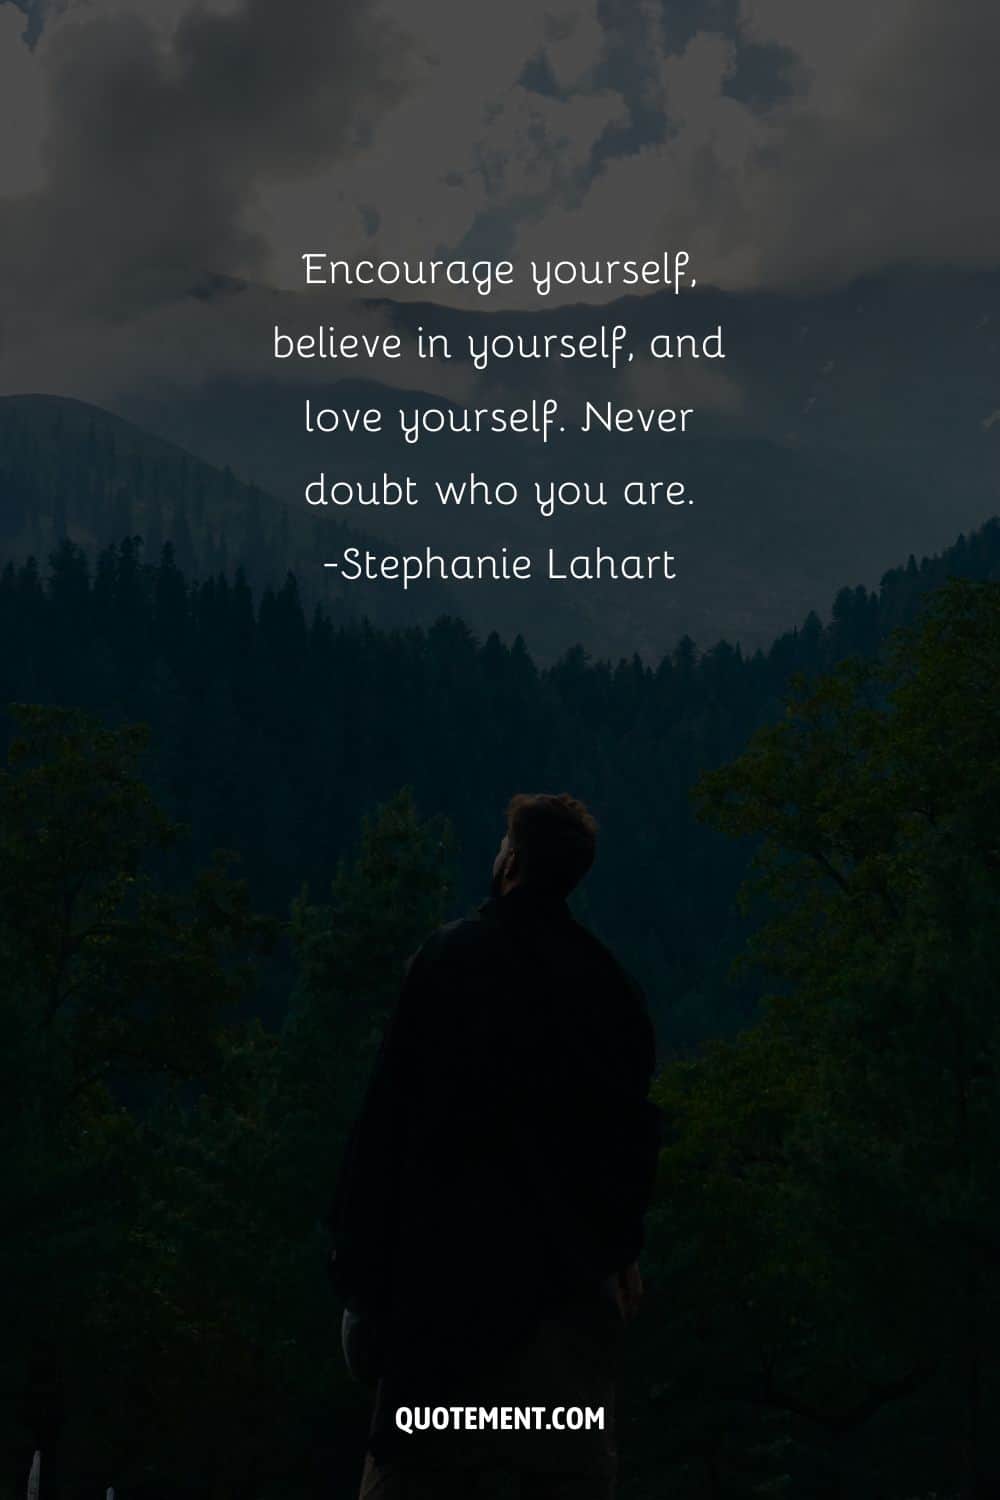 Encourage yourself, believe in yourself, and love yourself.